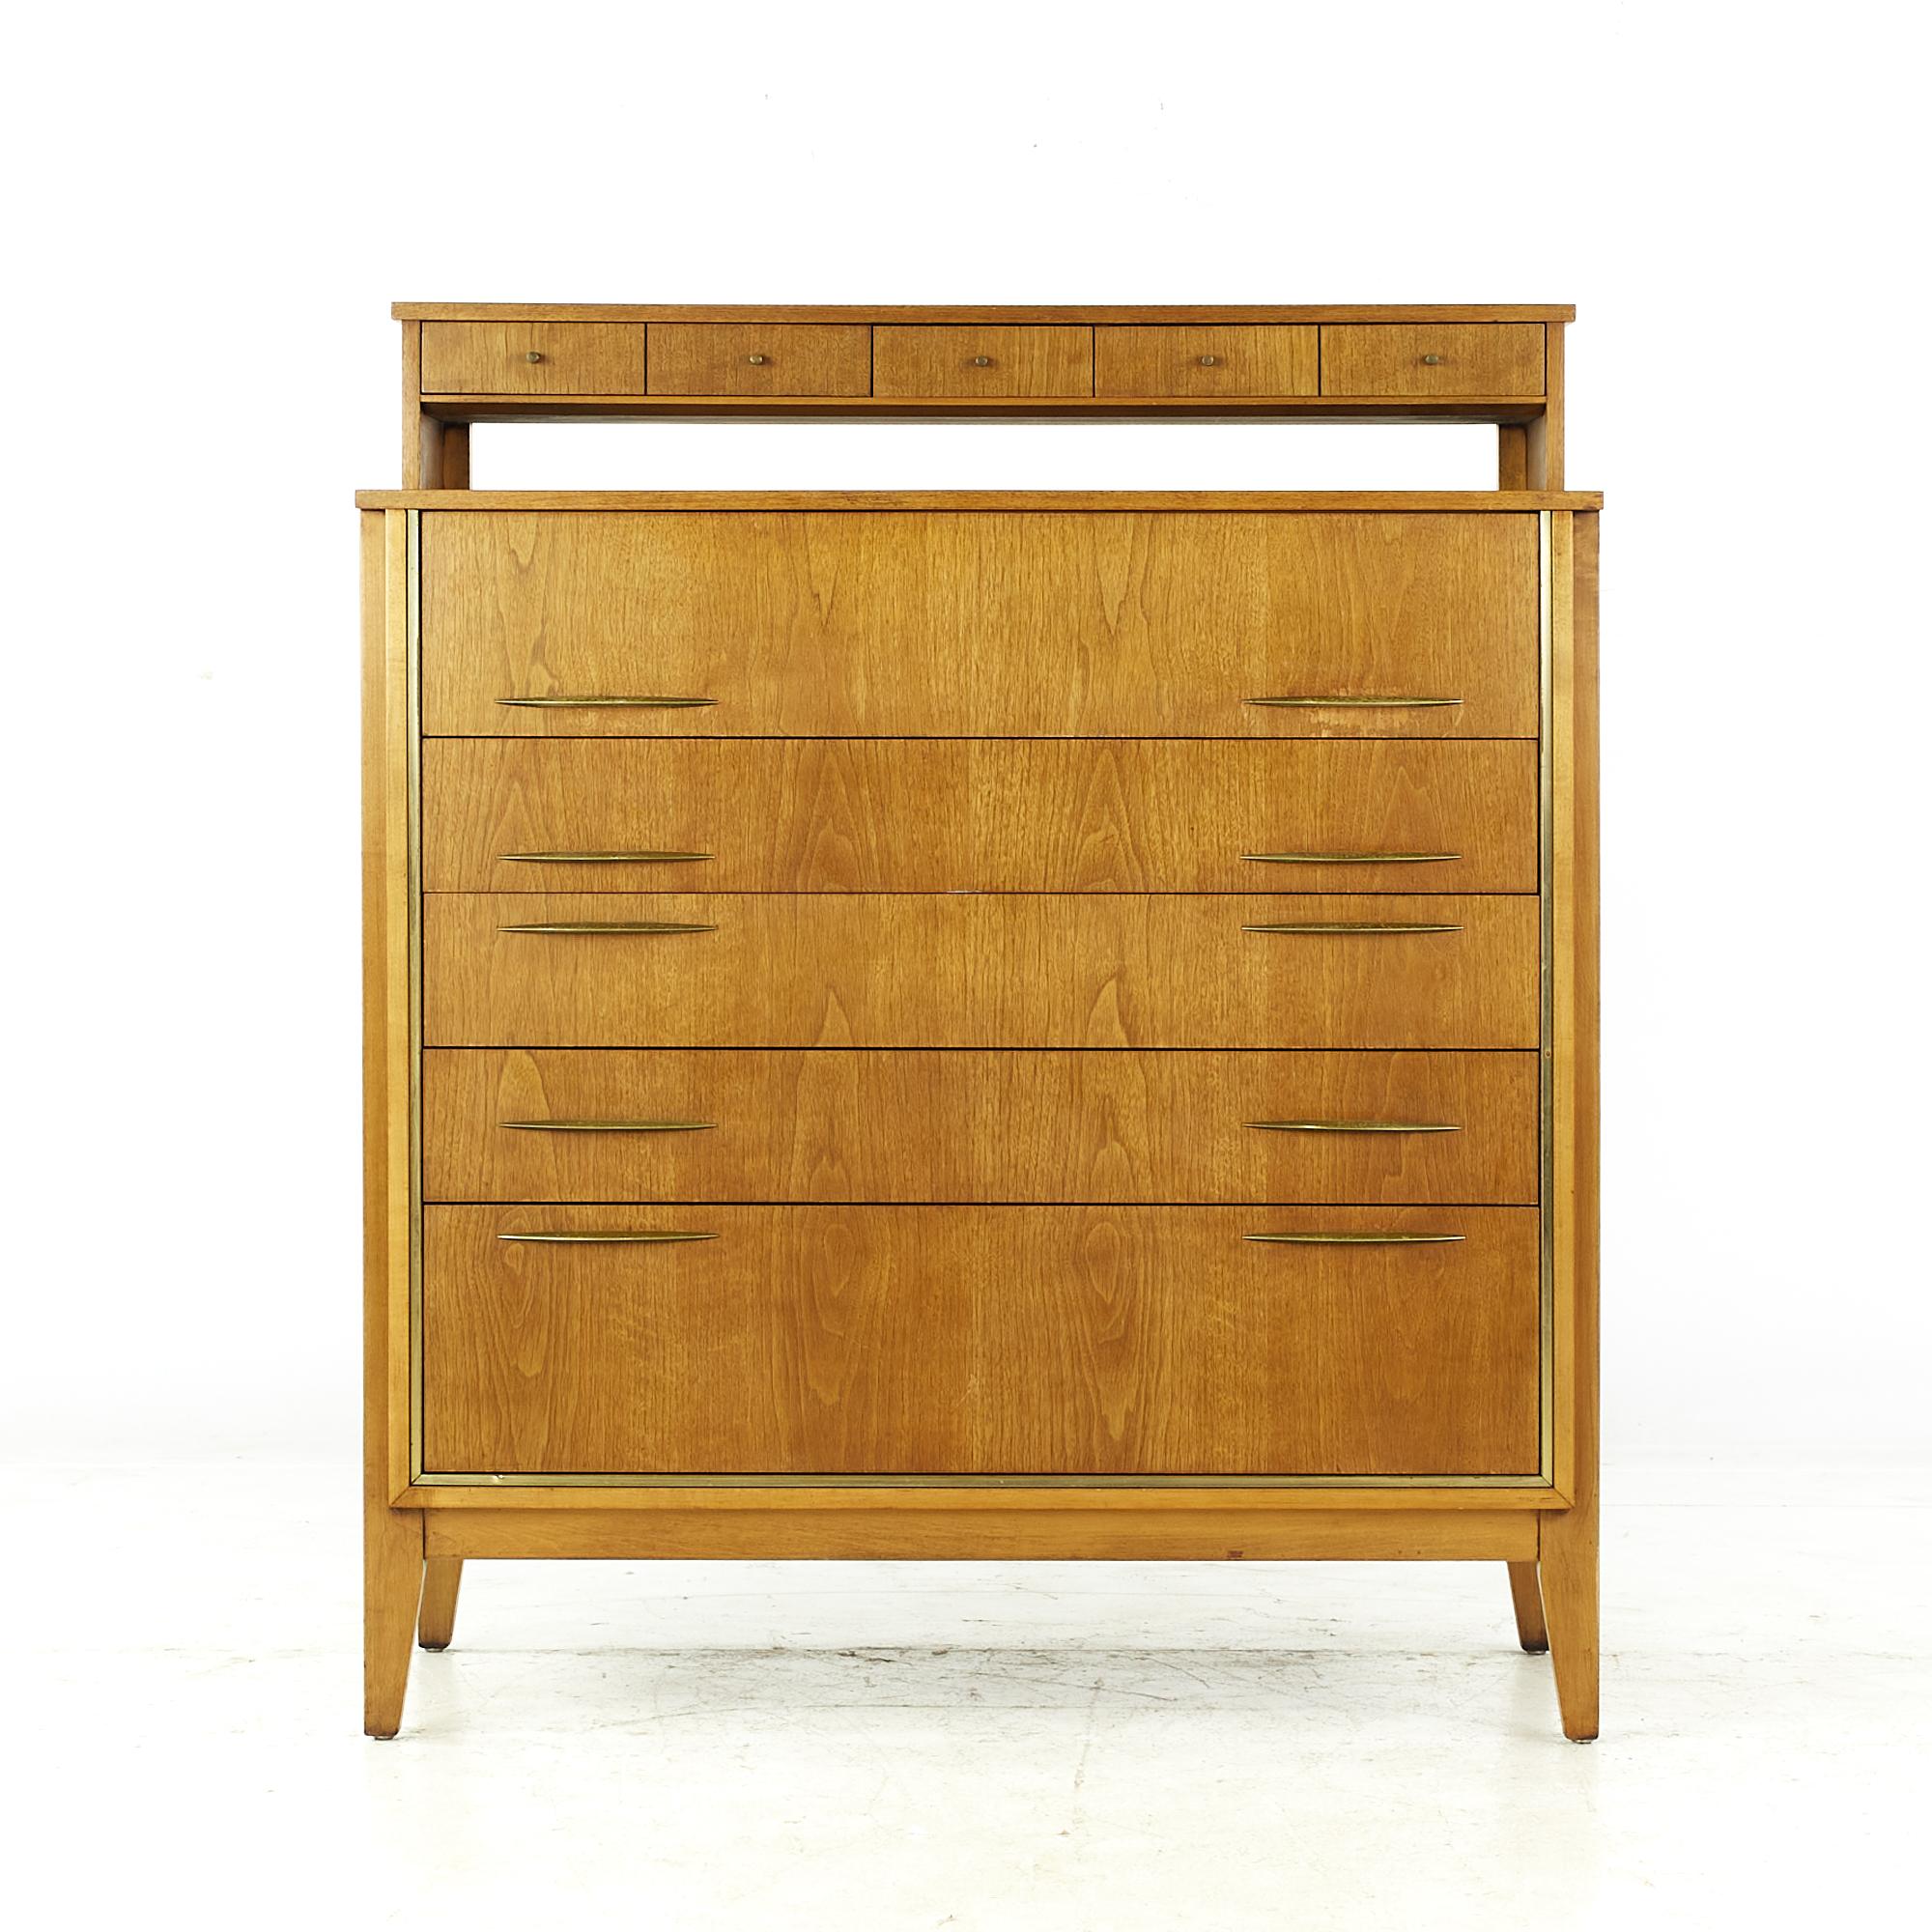 West Michigan Furniture Midcentury walnut and brass highboy

This highboy measures: 40 wide x 20 deep x 47 inches high

All pieces of furniture can be had in what we call restored vintage condition. That means the piece is restored upon purchase